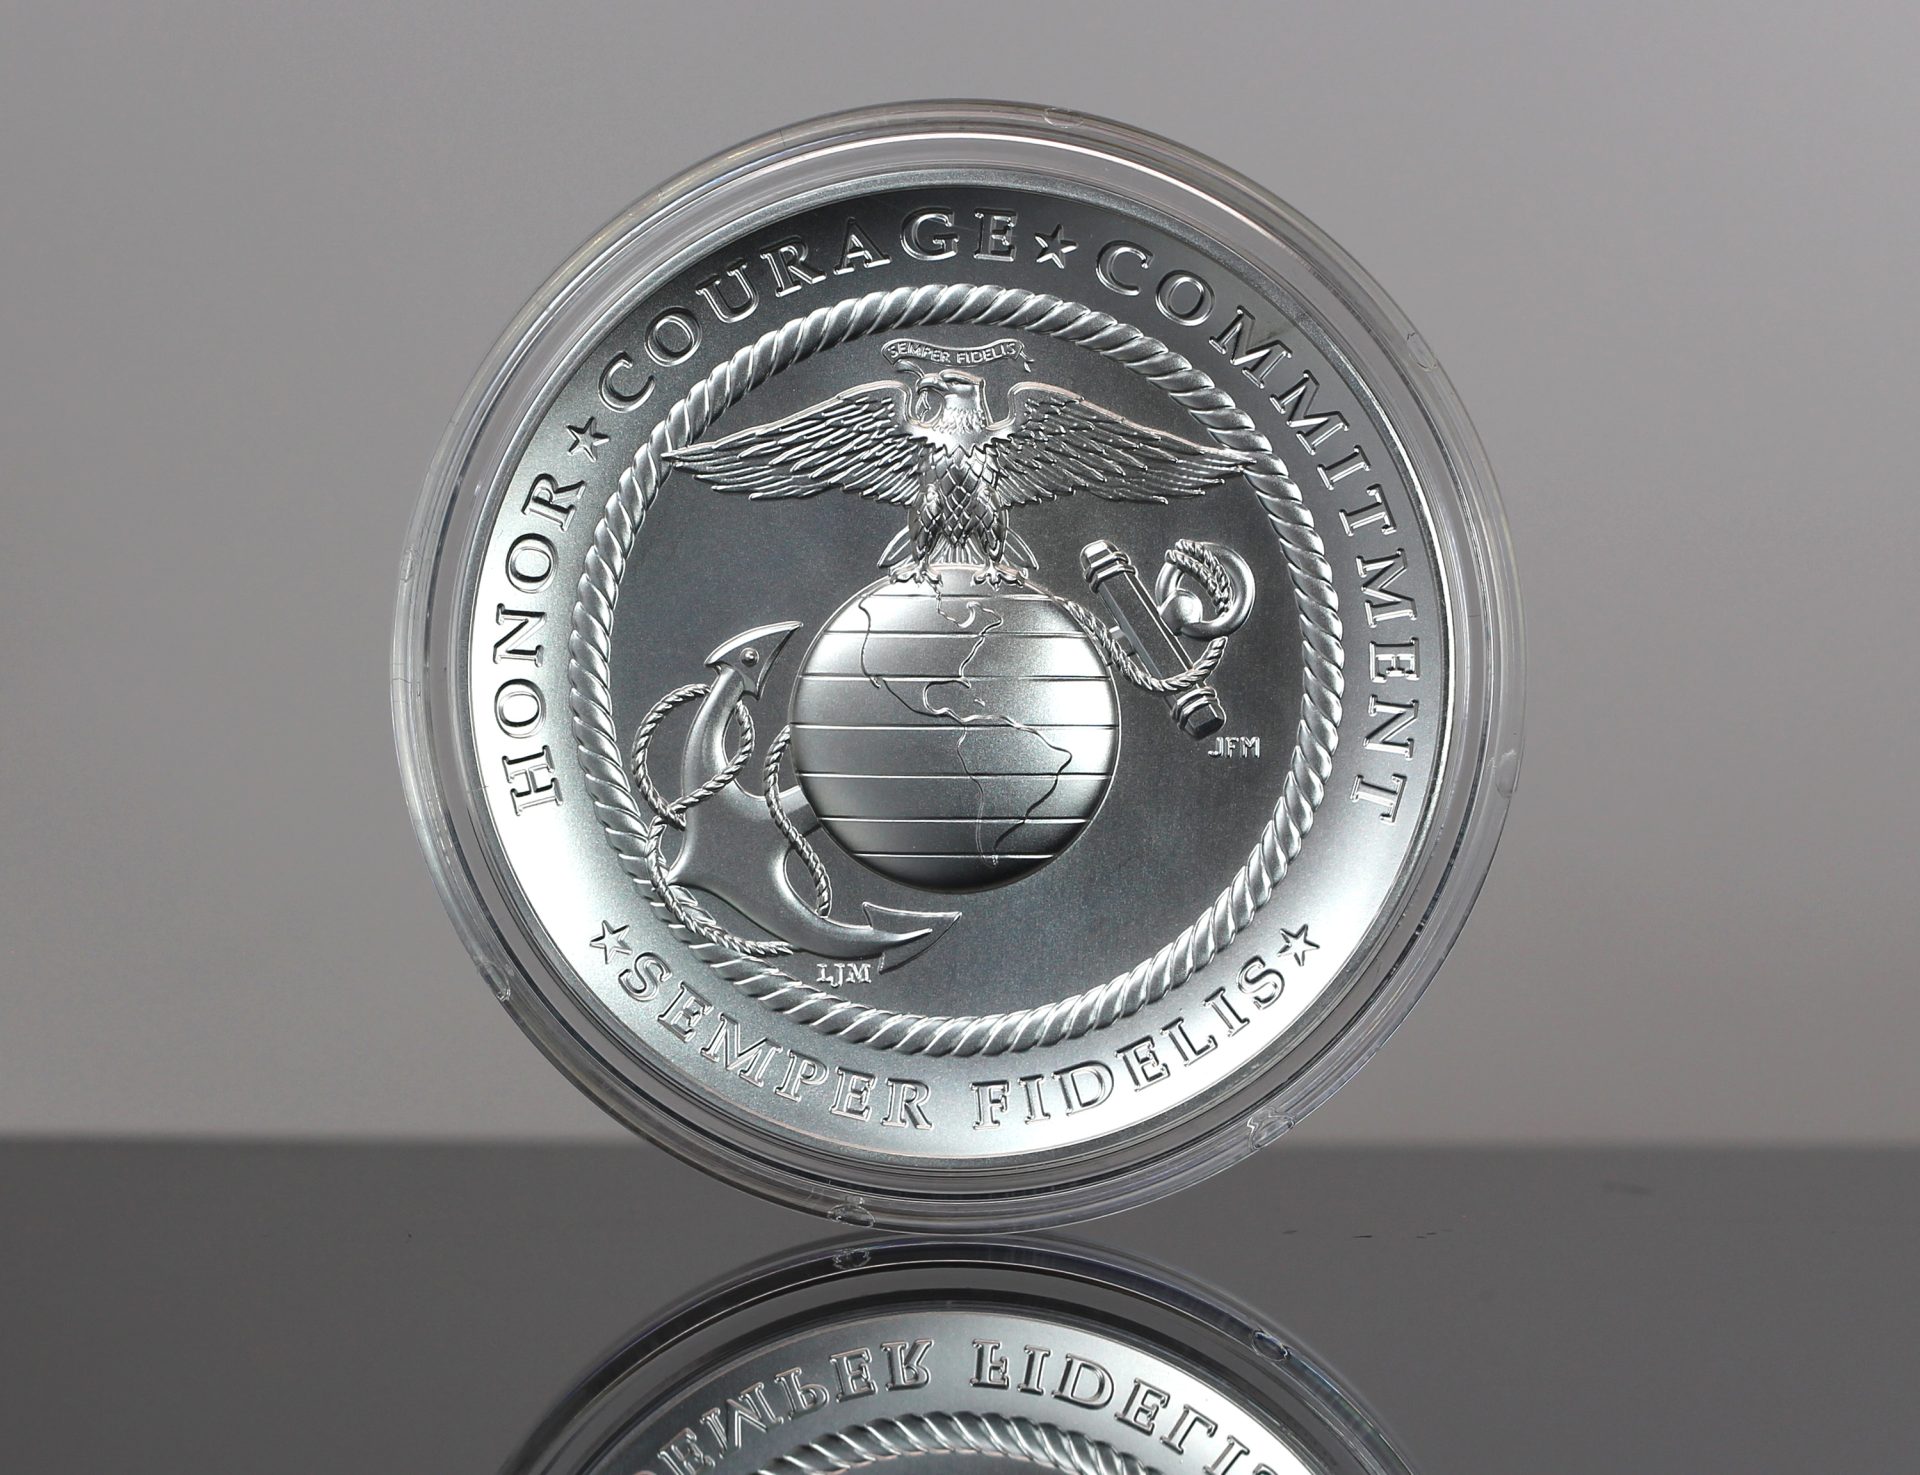 Marine Corps 250th Anniversary Commemorative Coins for 2025